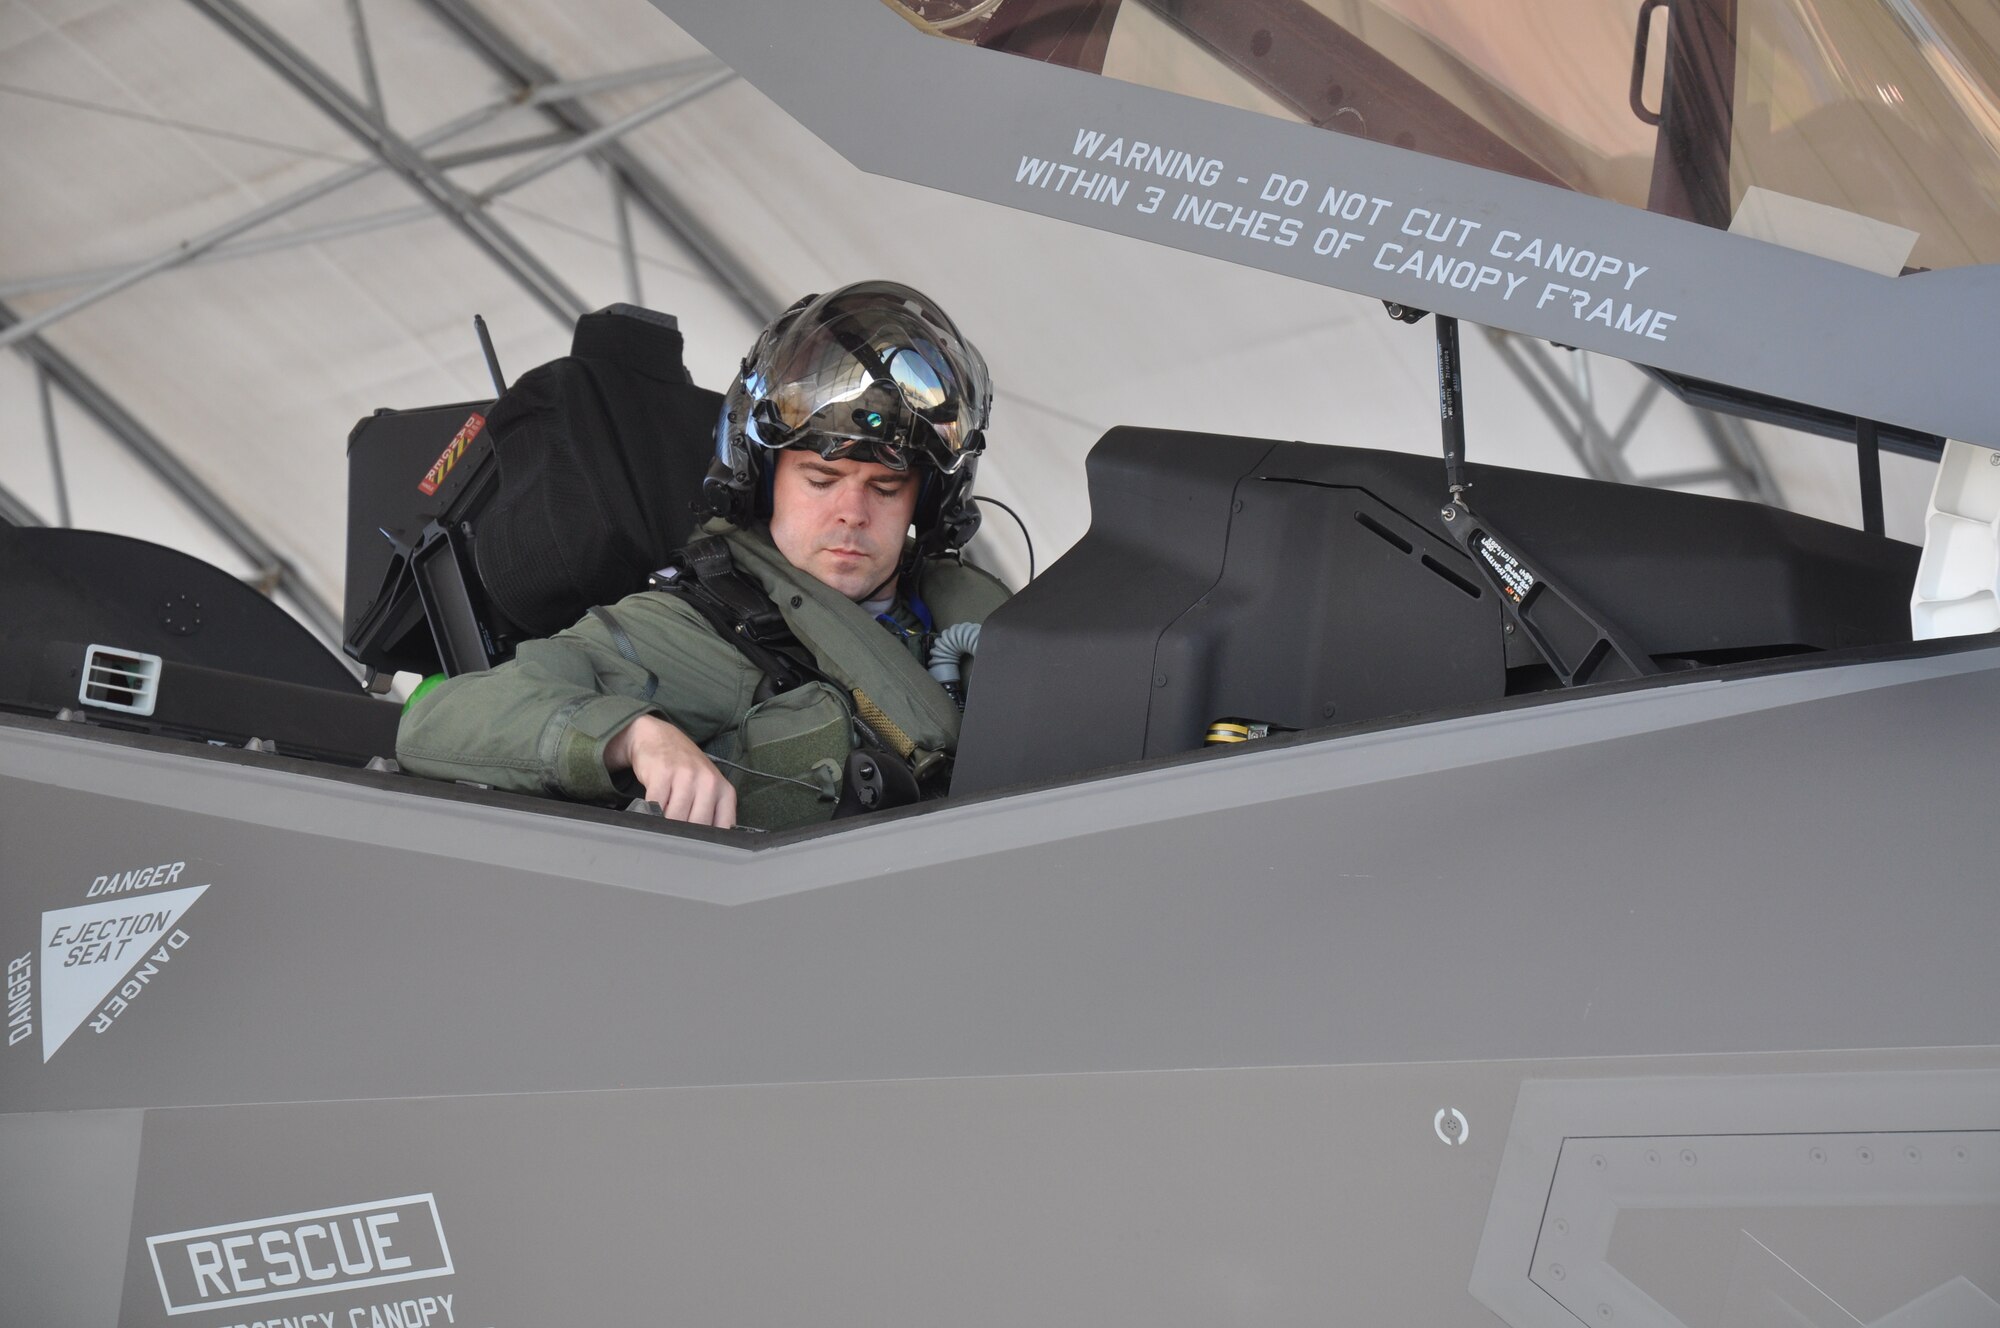 Major Jay Spohn performs pre-flight tasks in an F-35A Lightning II Joint Strike Fighter in July during preparations to becoming the Guard’s first F-35 instructor pilot.  He finished his last of six flights Aug. 3 to become a part of aviation history. Spohn is a Florida National Guard member and is embedded in the 33d Fighter Wing at Eglin Air Force Base where he is responsible for training up the fighter pilots who will fly the fifth-generation F-35 and will carry the U.S. Air Force into the next 50 years of air superiority. Photo by Major Karen Roganov, Team Eglin Public Affairs.